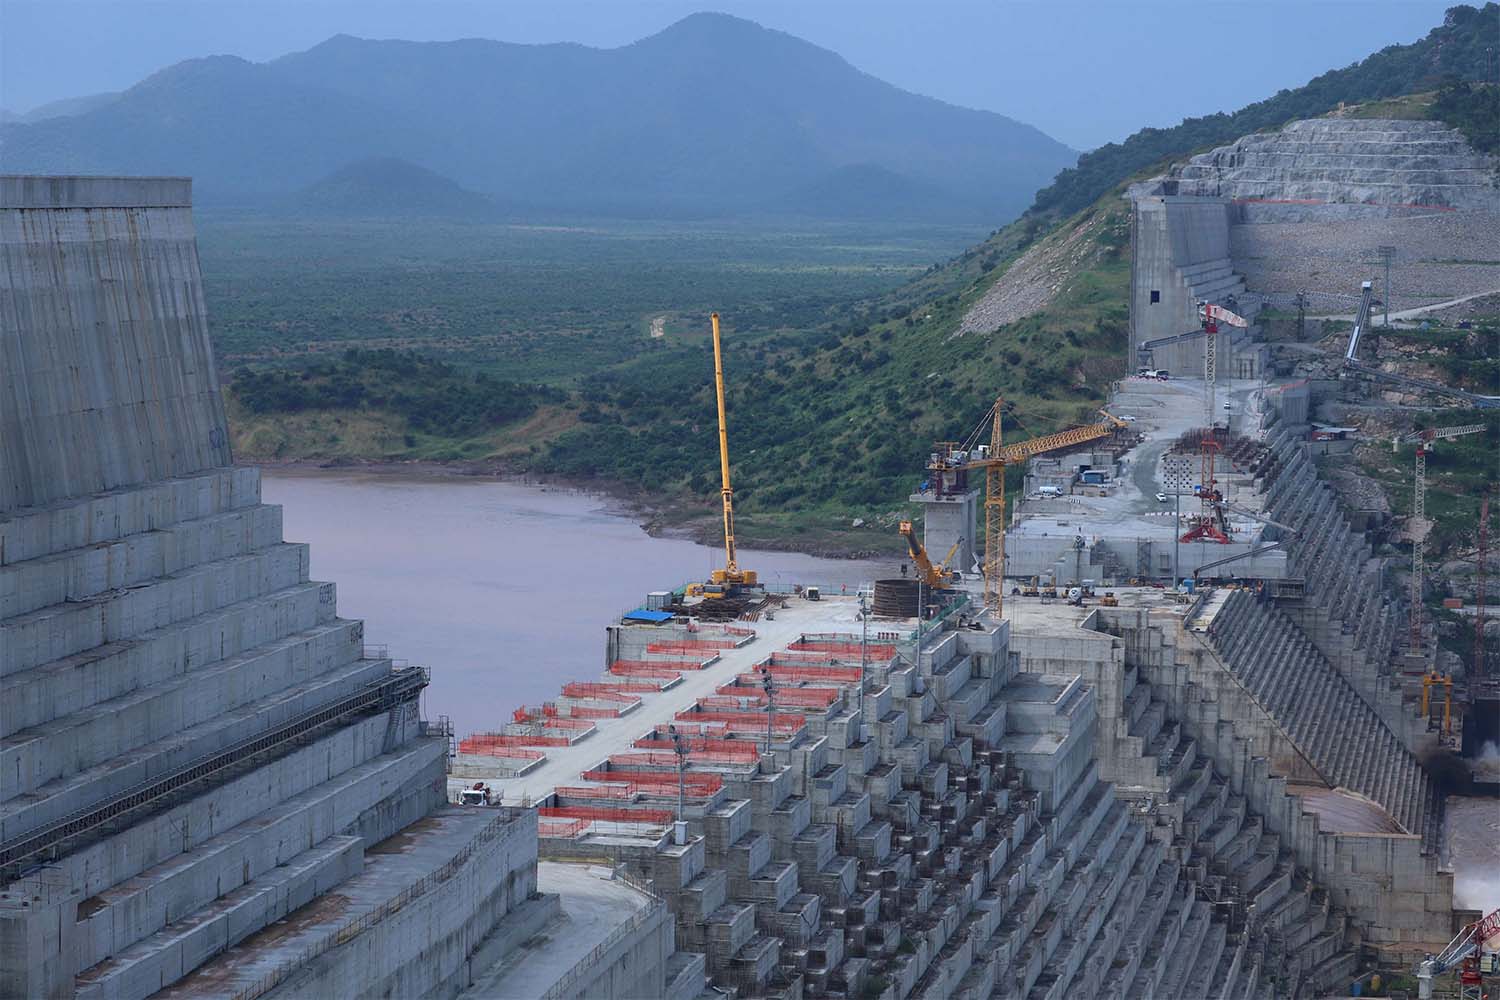 Egypt fears the Grand Ethiopian Renaissance Dam could restrict already scarce supplies of water from the Nile